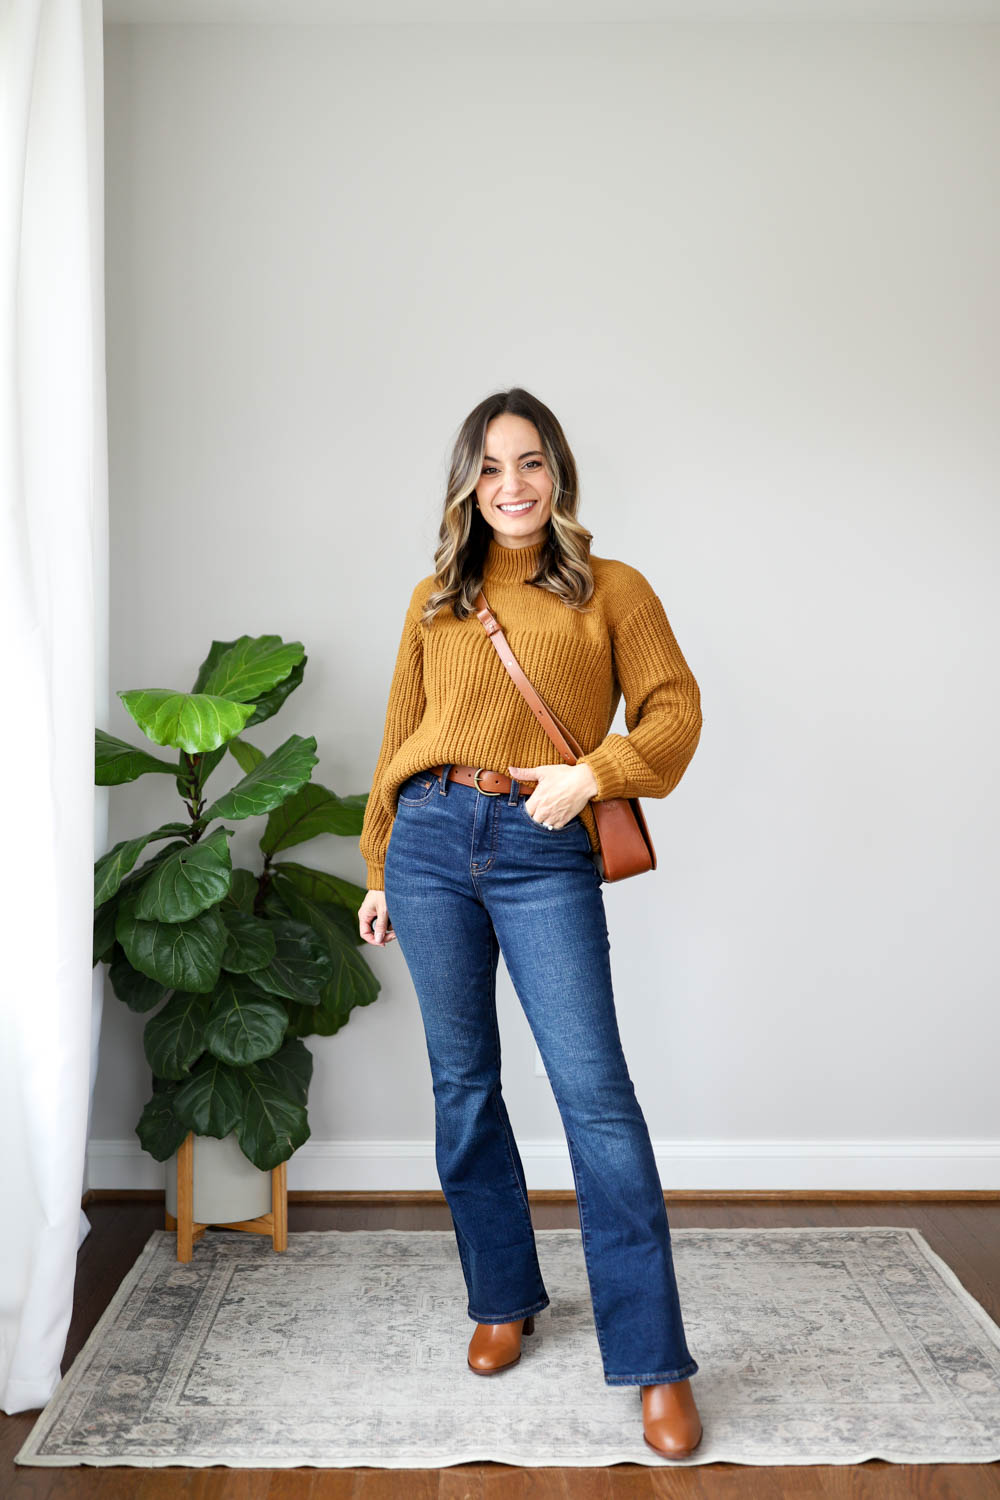 Warm fall outfits | sweater outfits | flare jeans outfits | fall fashion